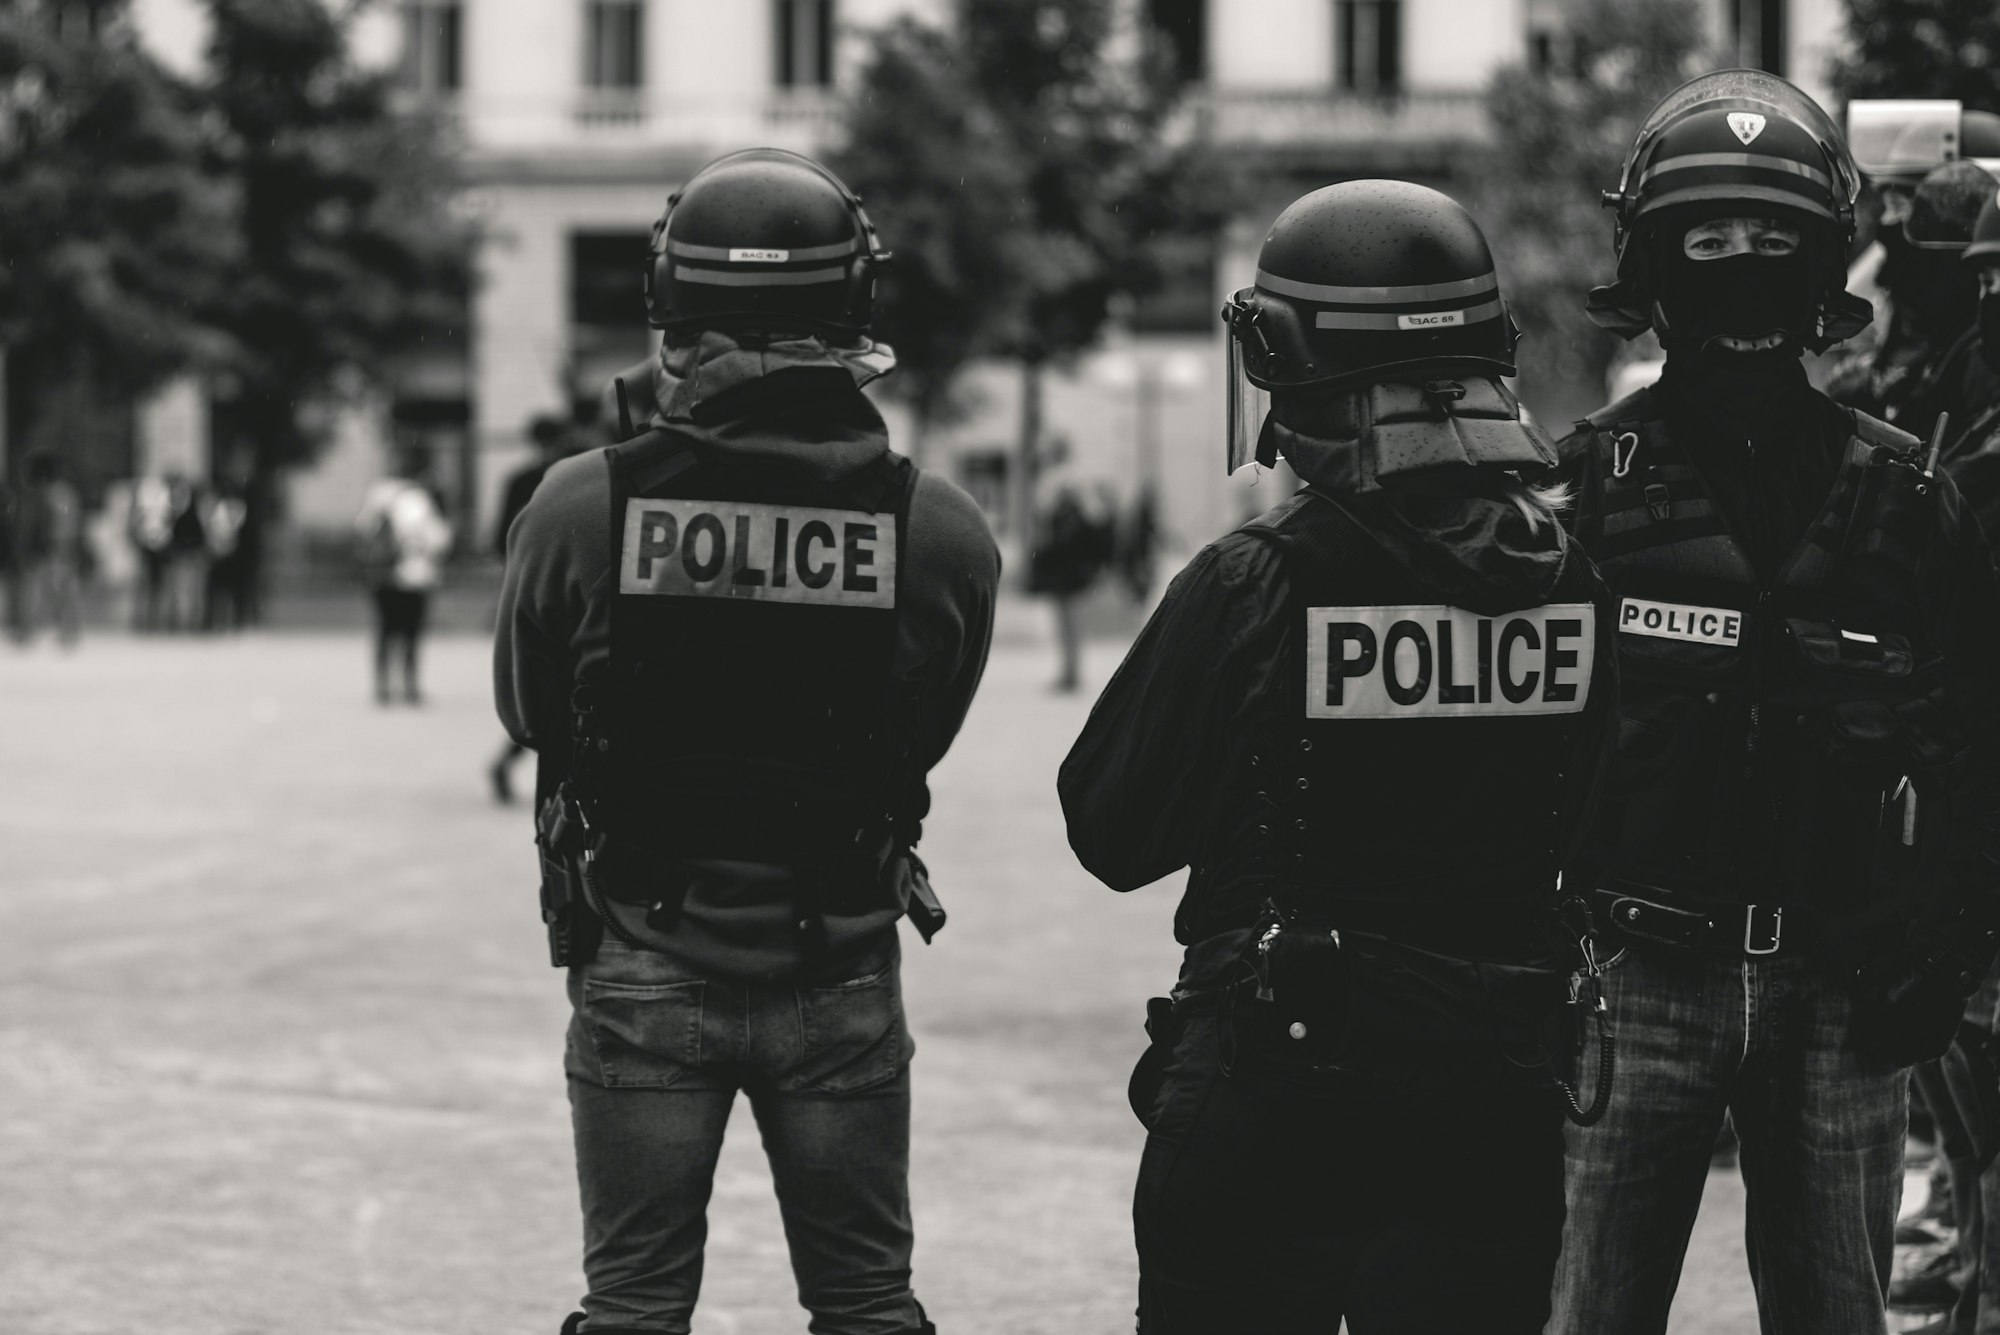 High police presence in Lyon, France, during the 25th weekend of the yellow vests movement.

Police violence is at its highest since the 1950s. As of now, 23 protestors and bystanders have lost an eye and 5 persons their hand (source: mediapart.fr, http://tiny.cc/6hd85y)
Recently an independant journalist, got arrested (https://twitter.com/GaspardGlanz).
Violence continues, even though Amnesty International and the UN condemn the use of excessive force against protesters (source: amnesty.org, http://tiny.cc/3jd85y).